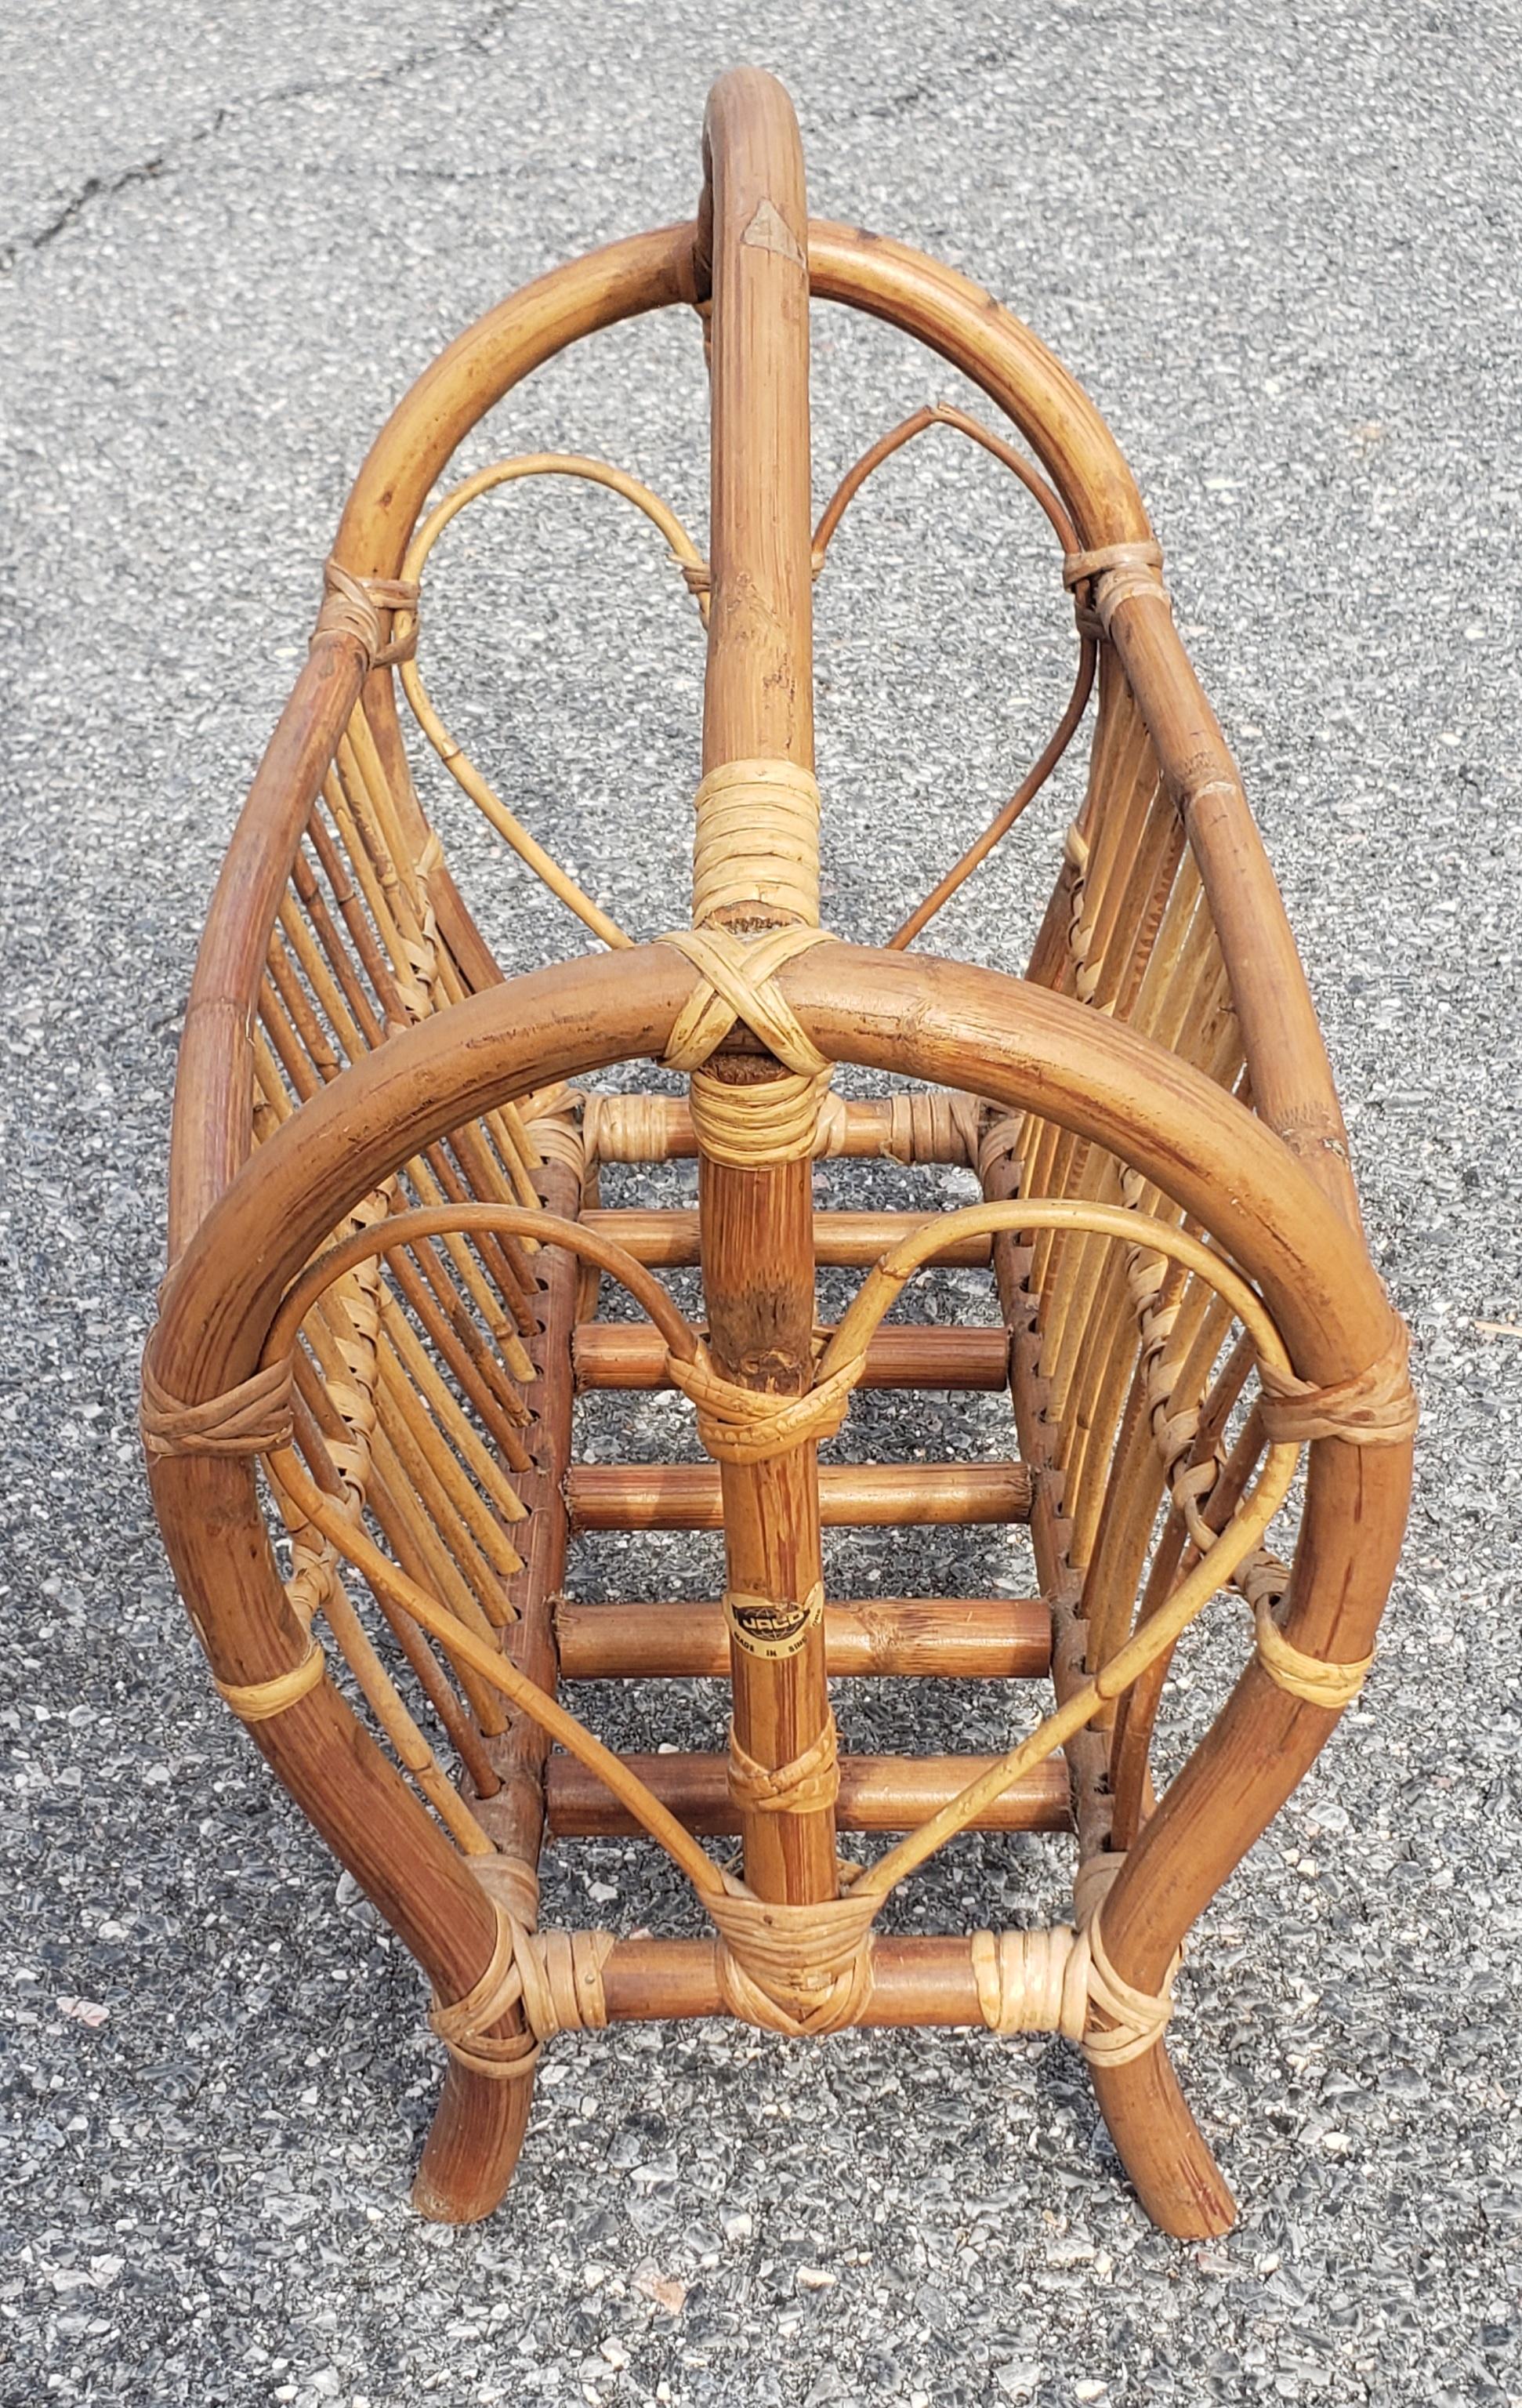 Hand-Crafted 1970s Rattan Wicker Magazine Rack For Sale